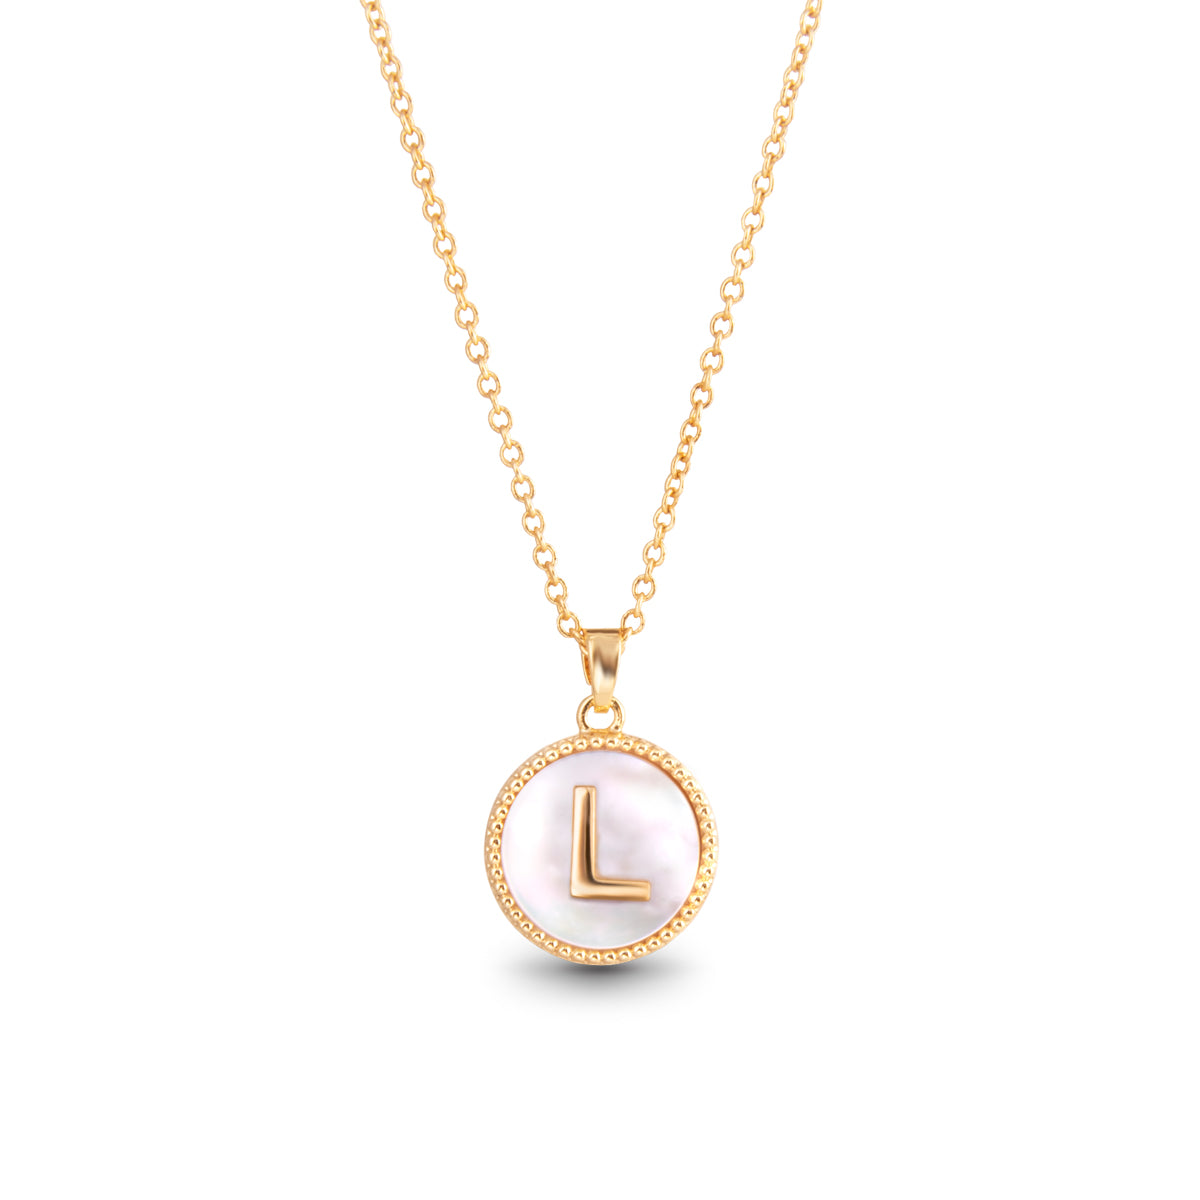 Gold Mother of Pearl Initial Necklace - L